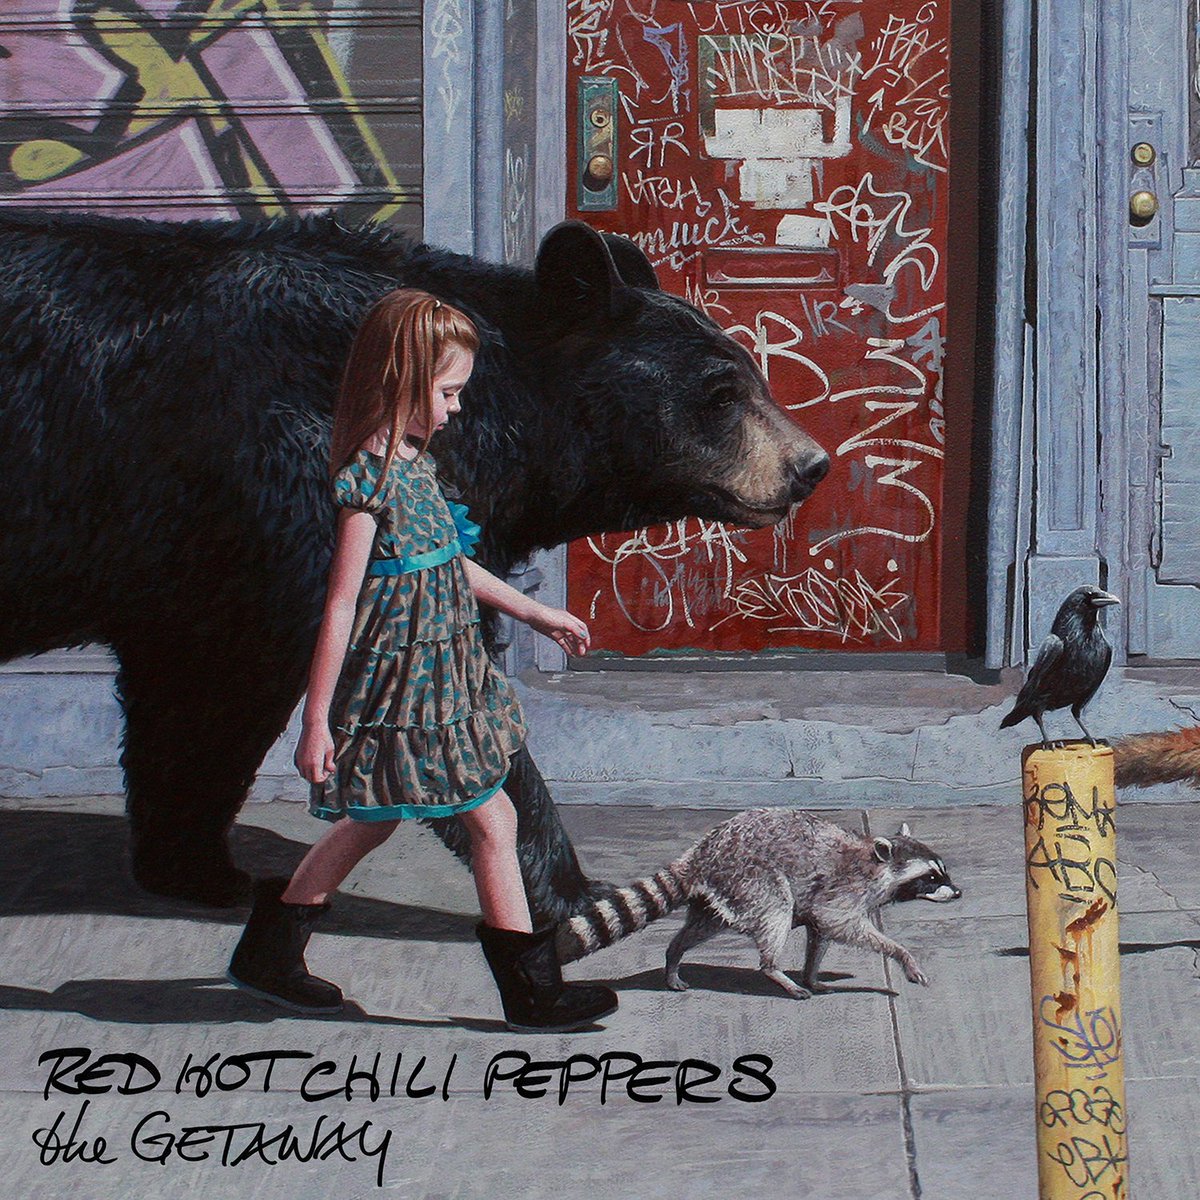 Listen to new song “Dark Necessities” & preorder new album The Getaway now redhotchilipeppers.com/news/516-the-g… #RHCP #TheGetaway